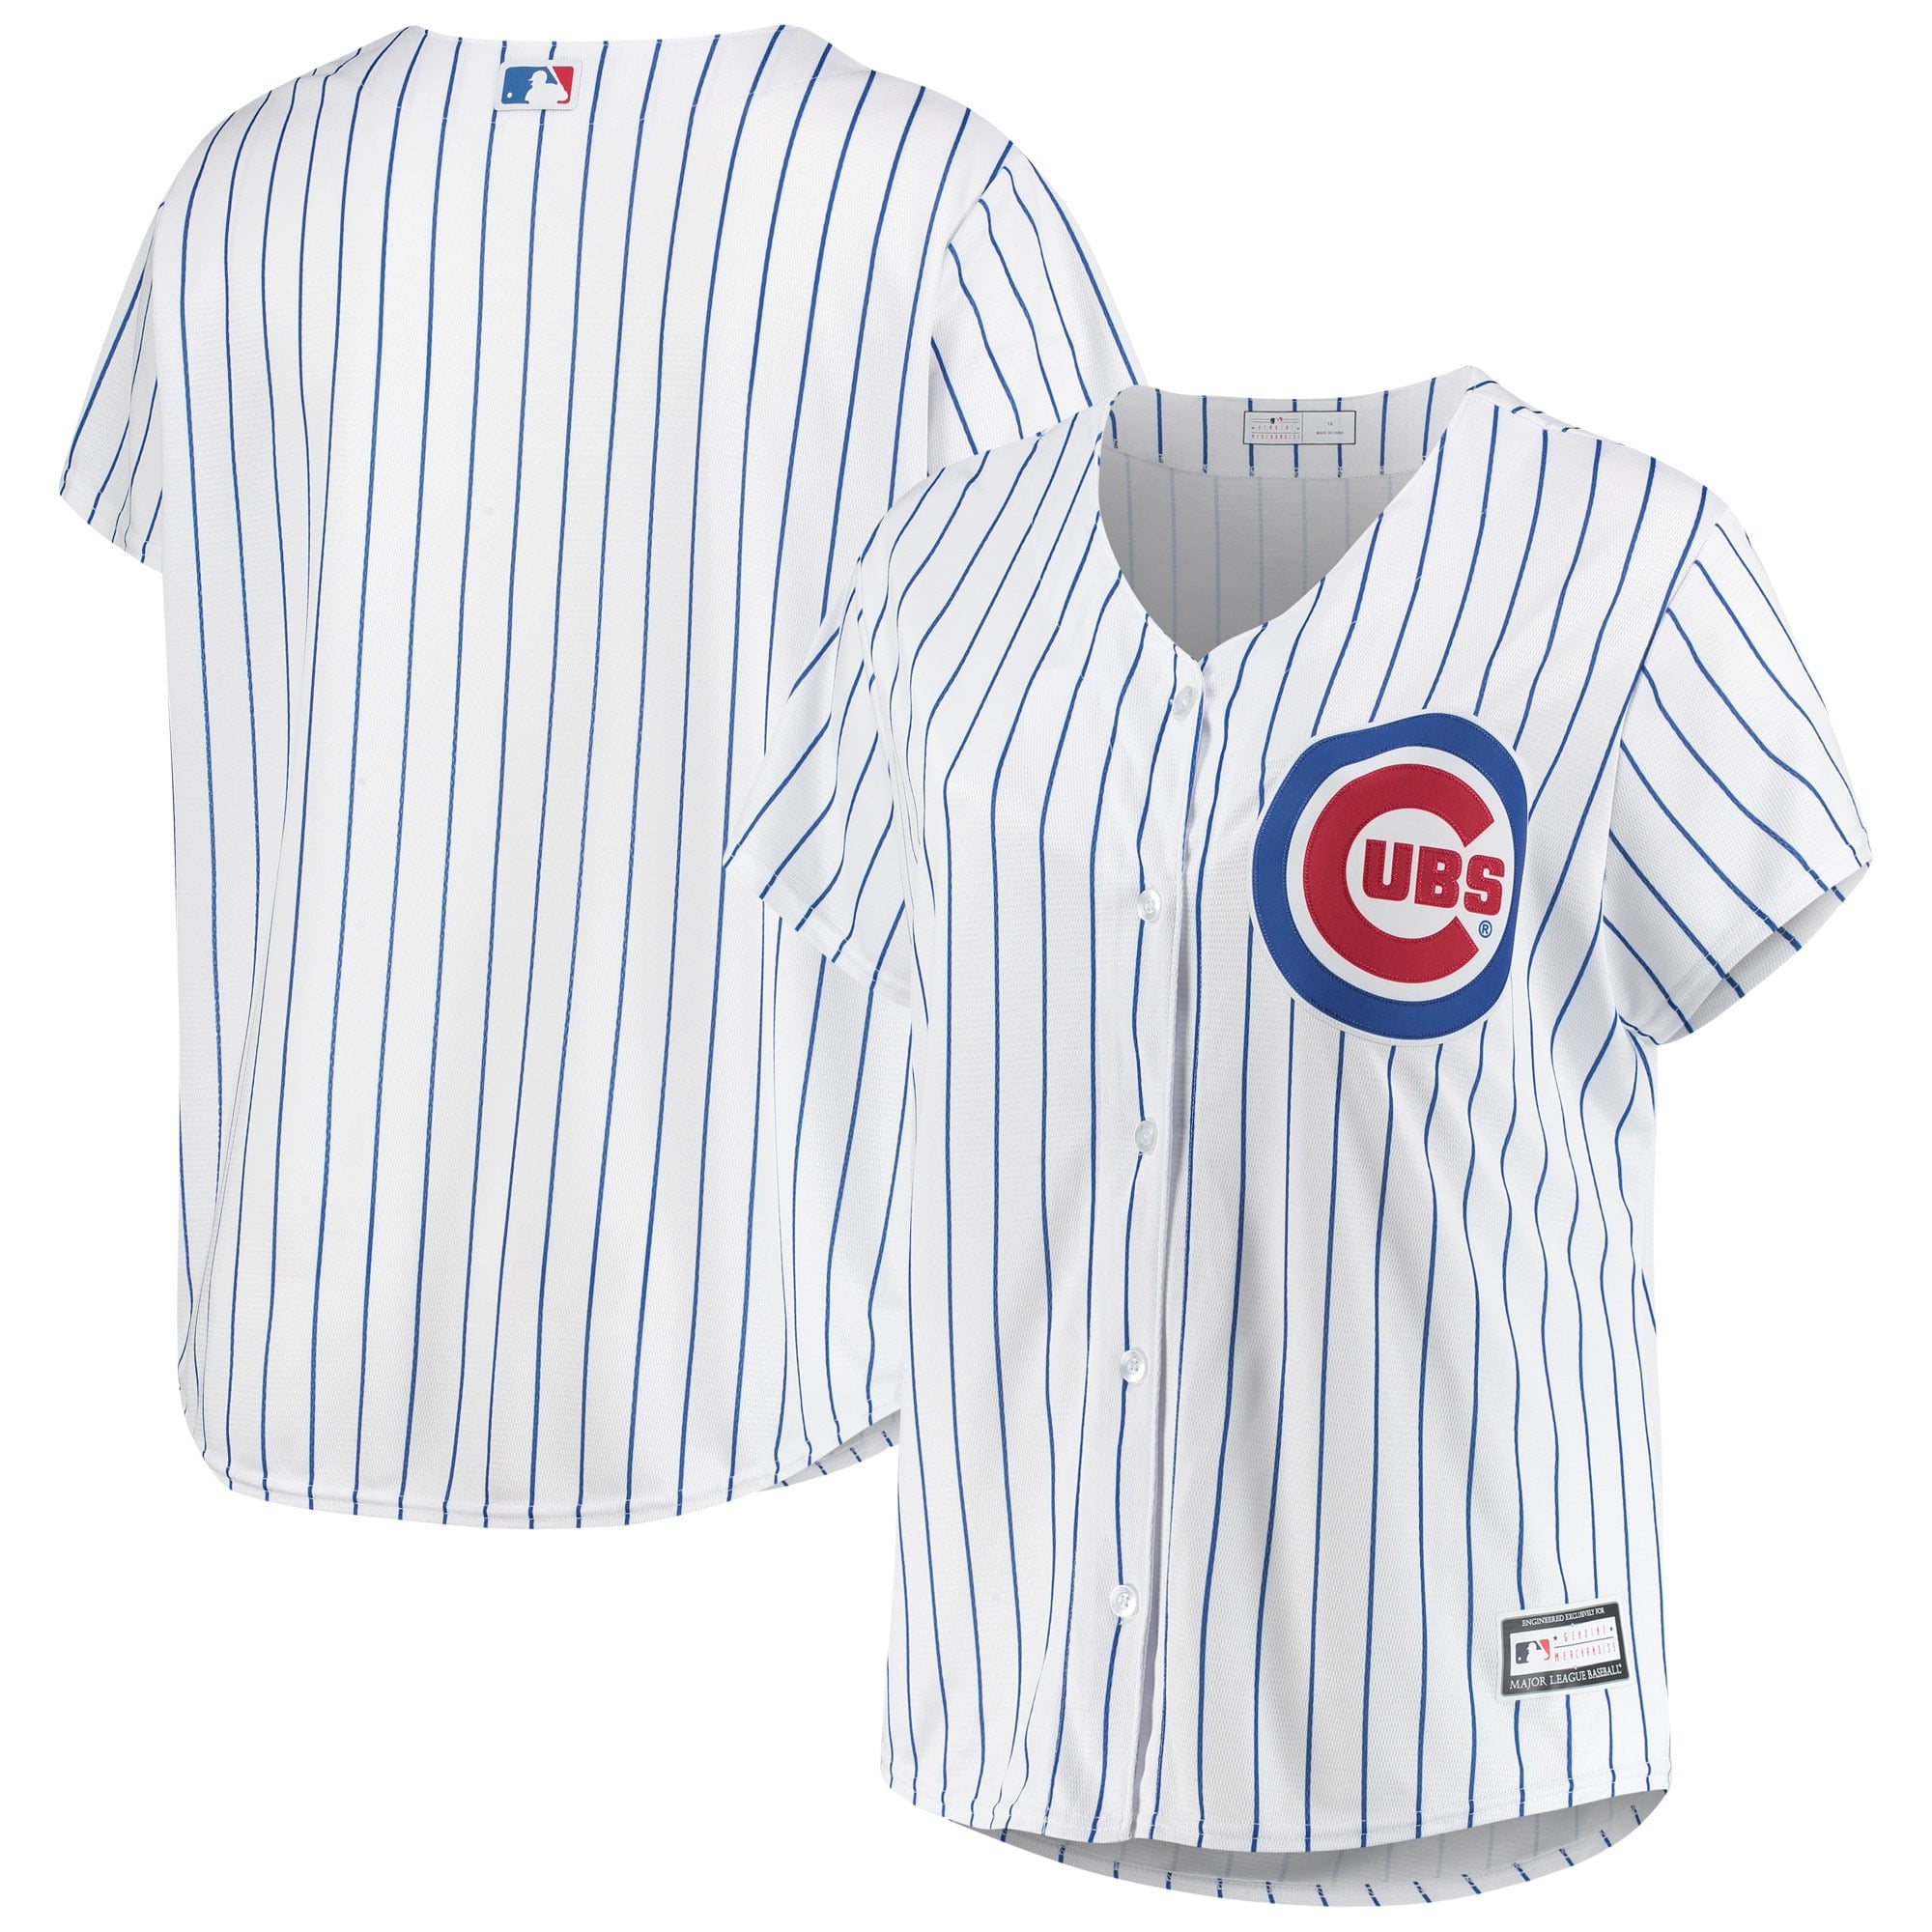 chicago cubs mlb jersey vs replica jersey